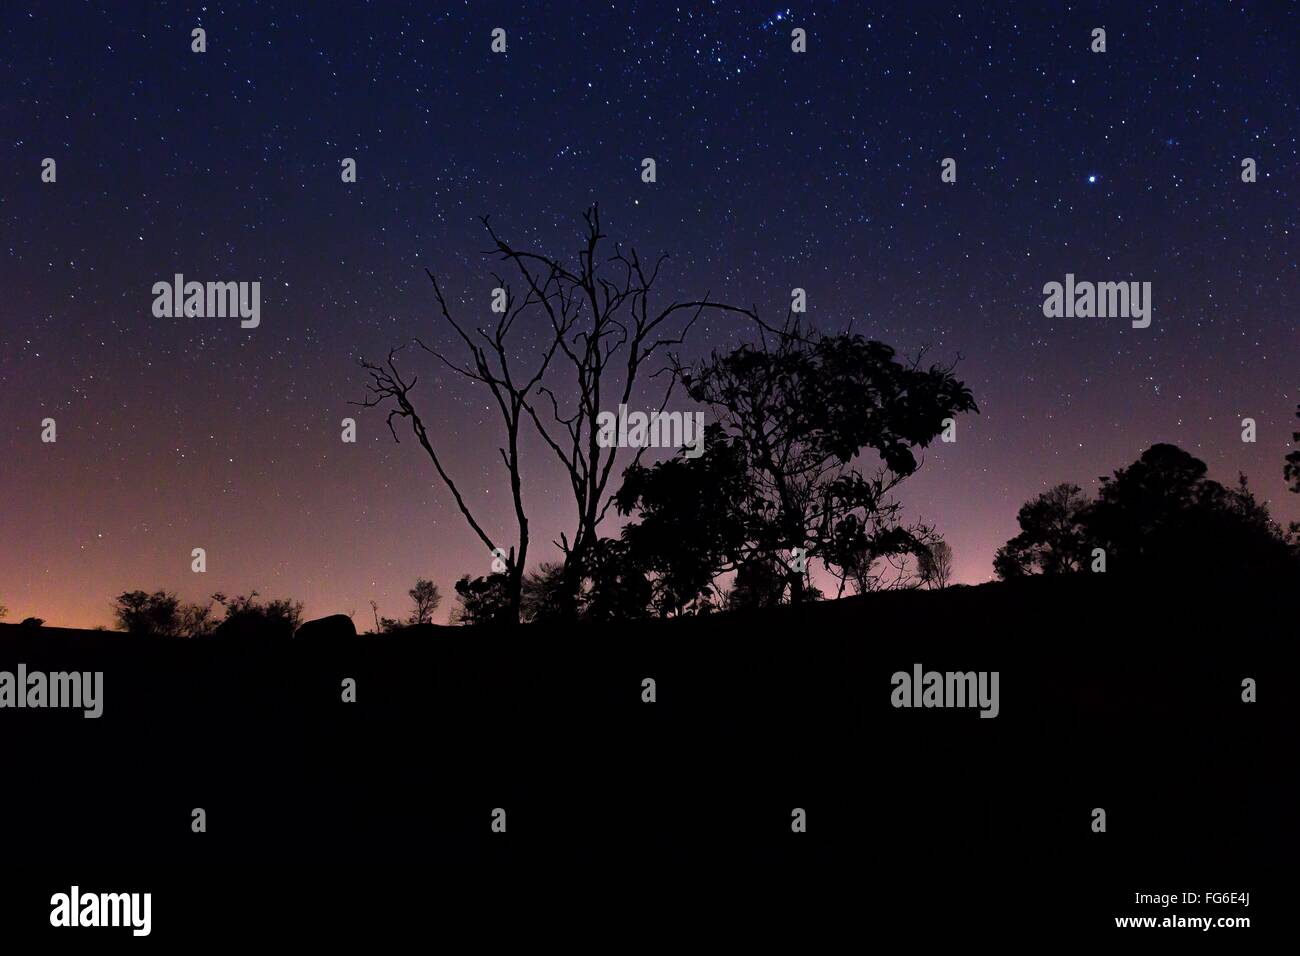 Low Angle View Of Silhouette Trees On Field Against Sky At Dusk Stock Photo